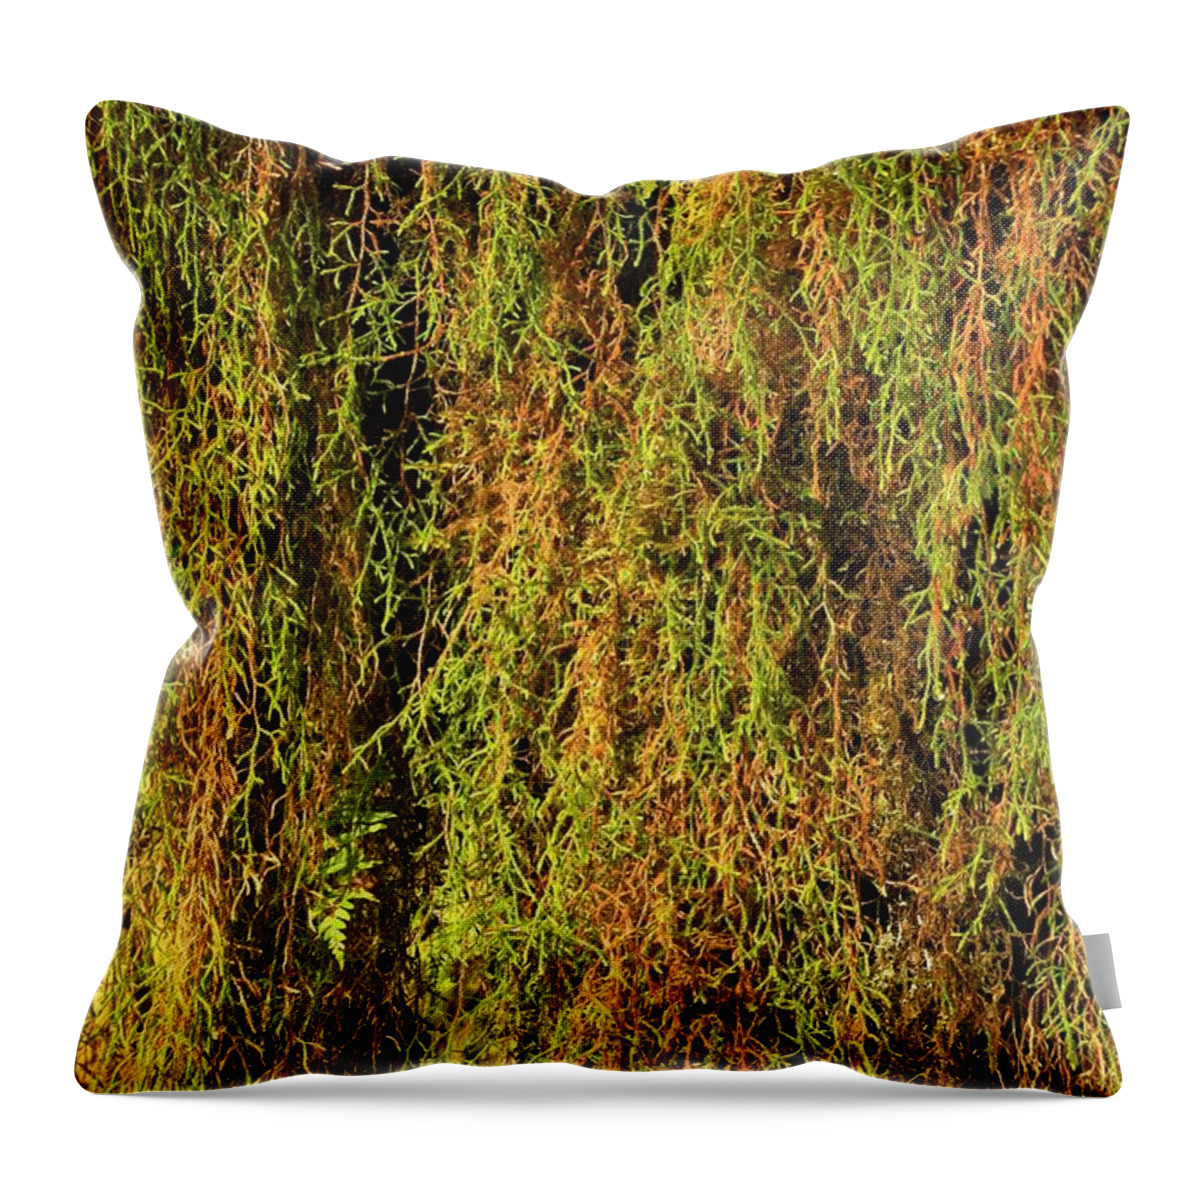 Hoh Rainforest Throw Pillow featuring the photograph Olympic Peninsula Hanging Moss by Adam Jewell